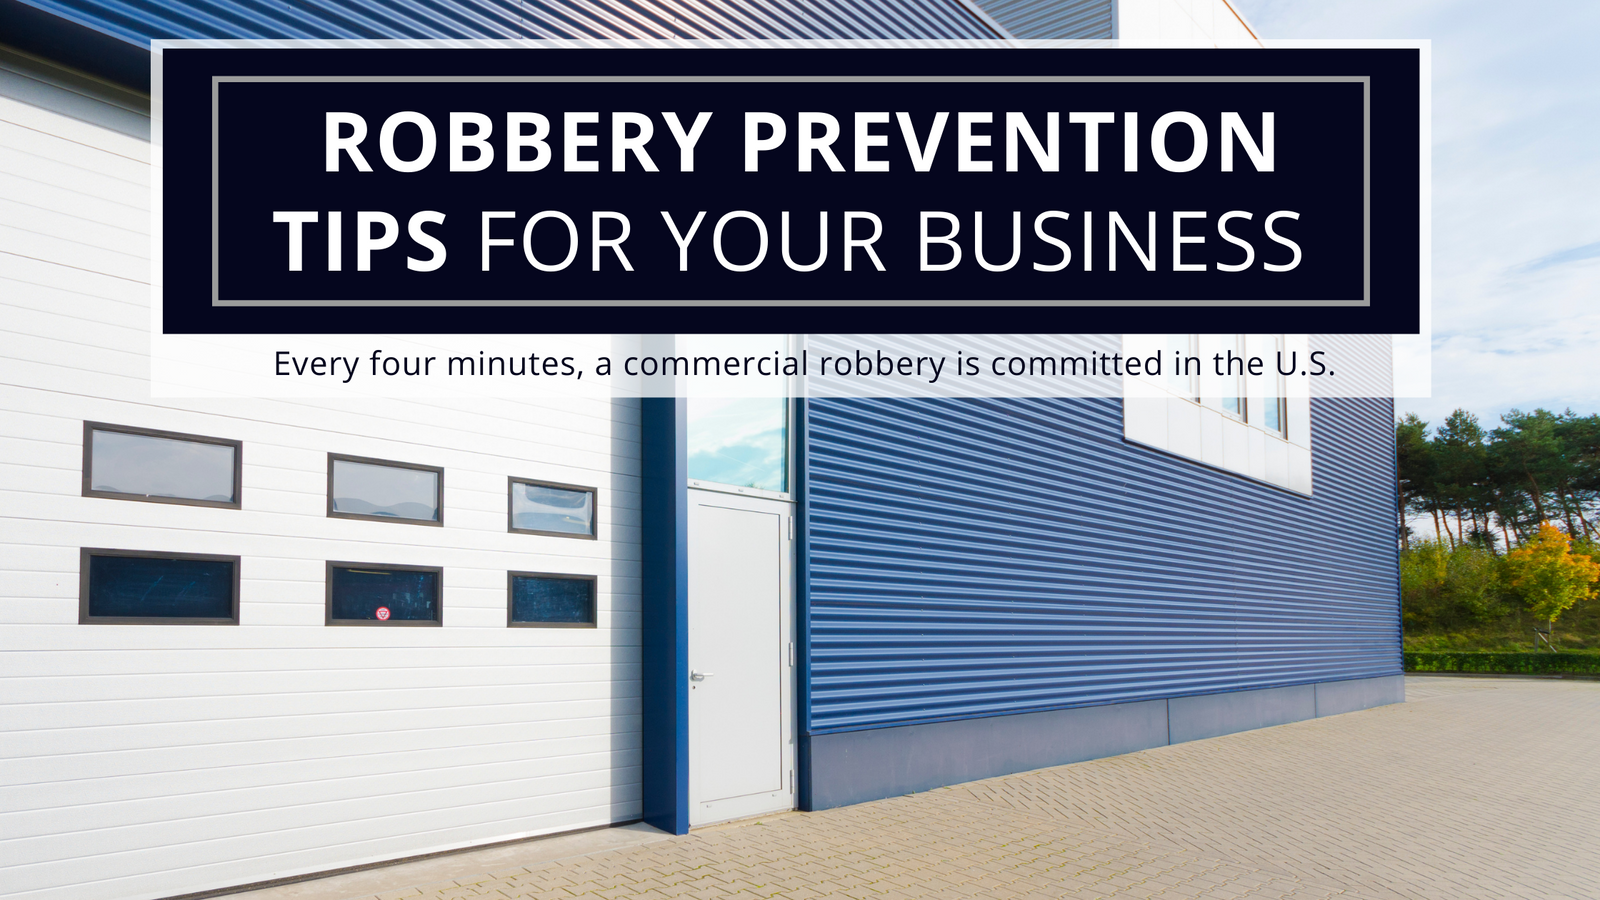 Robbery Prevention Tips for Your Business